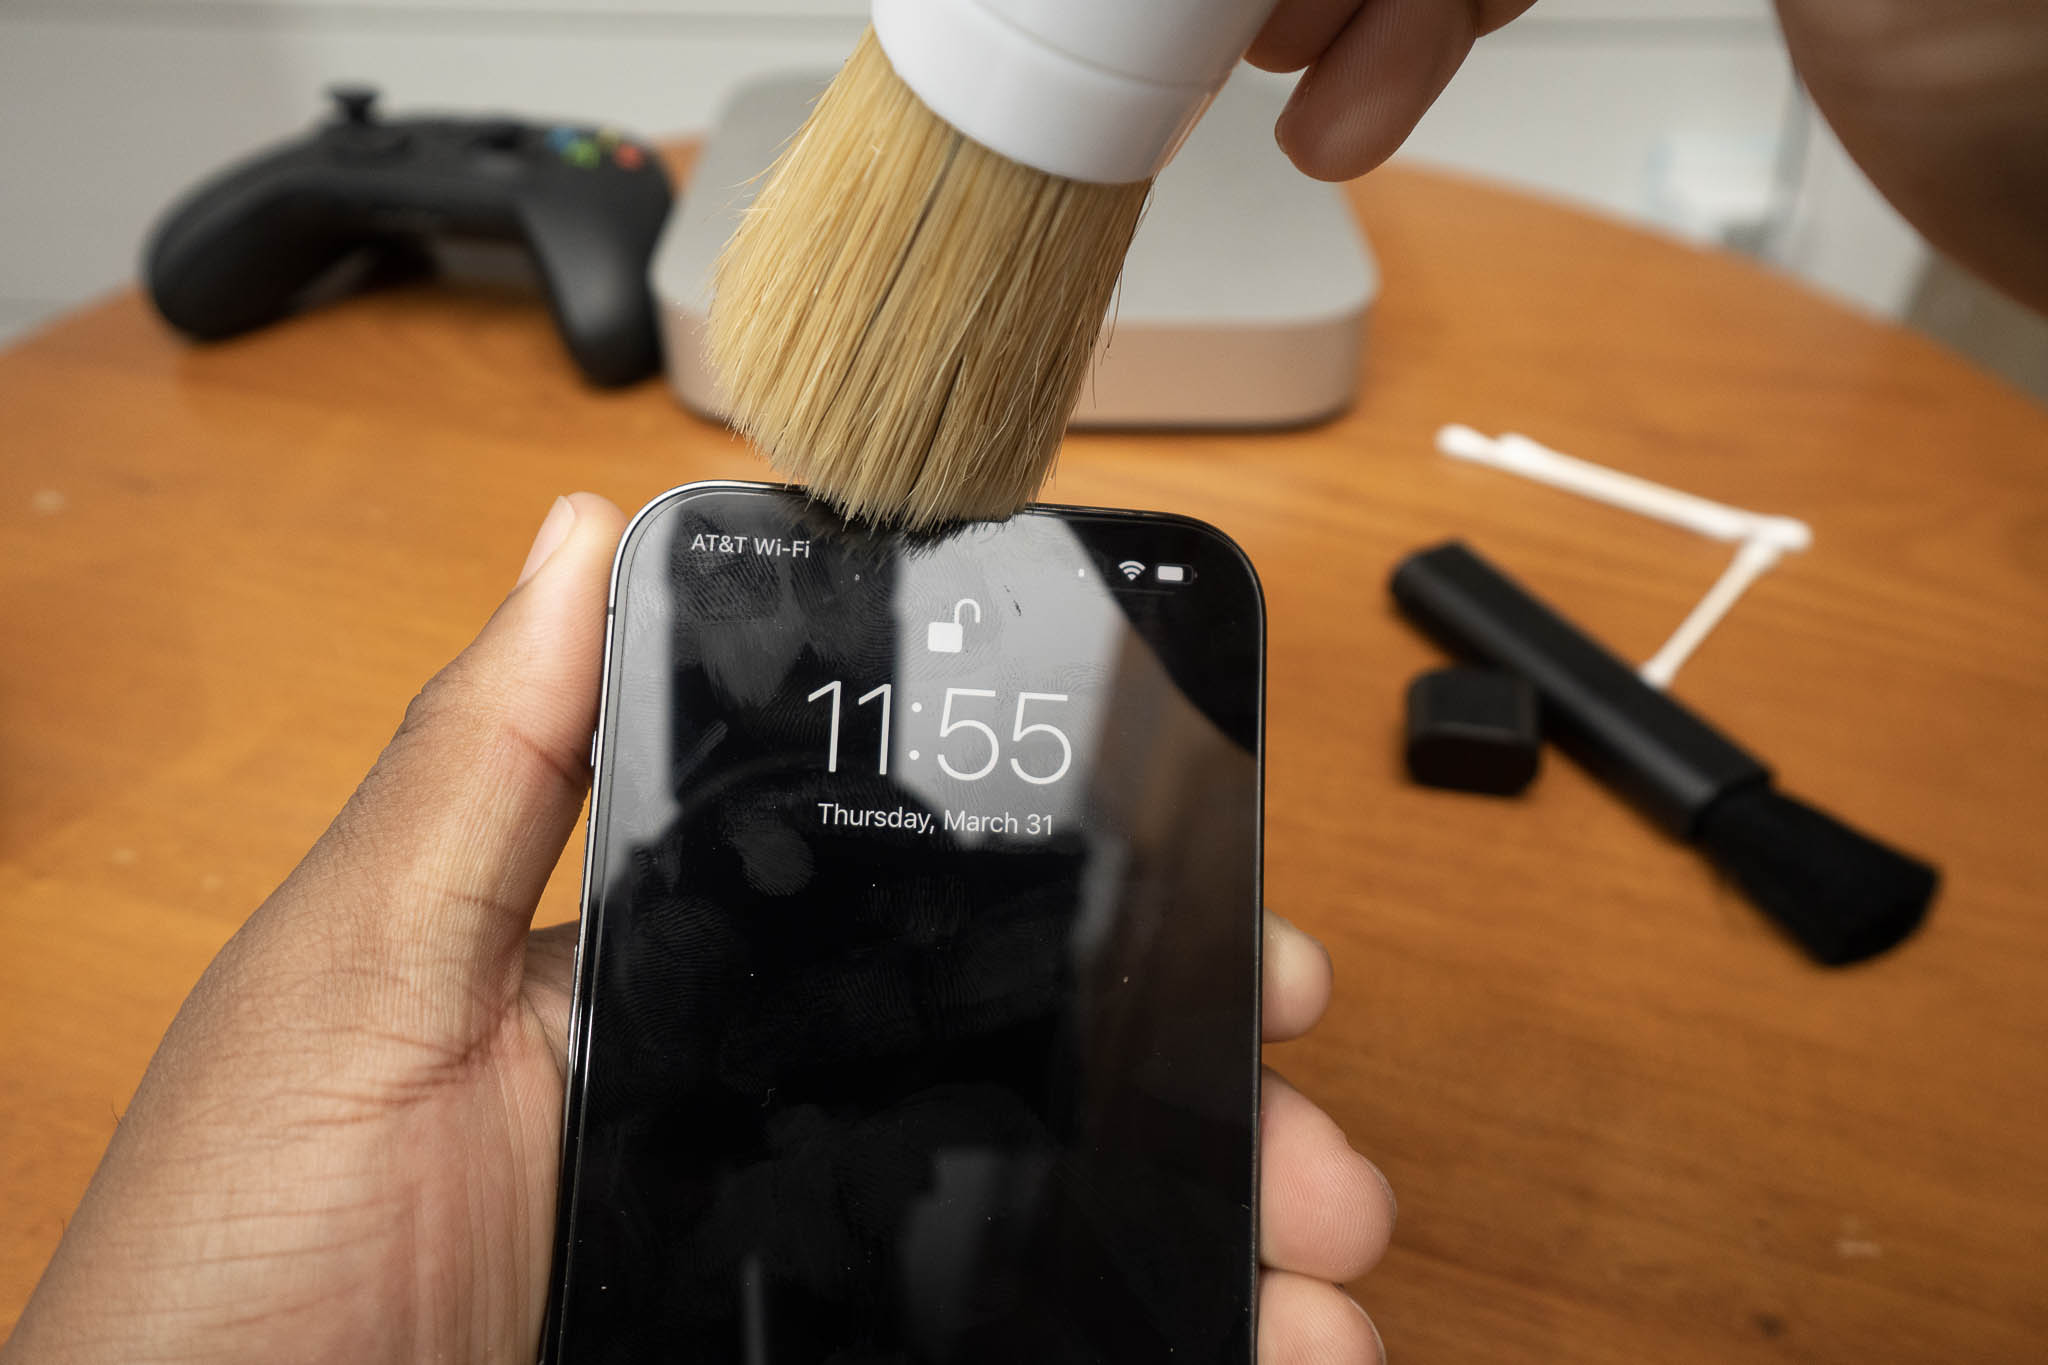 cleaning iphone earpiece speaker with detail brush